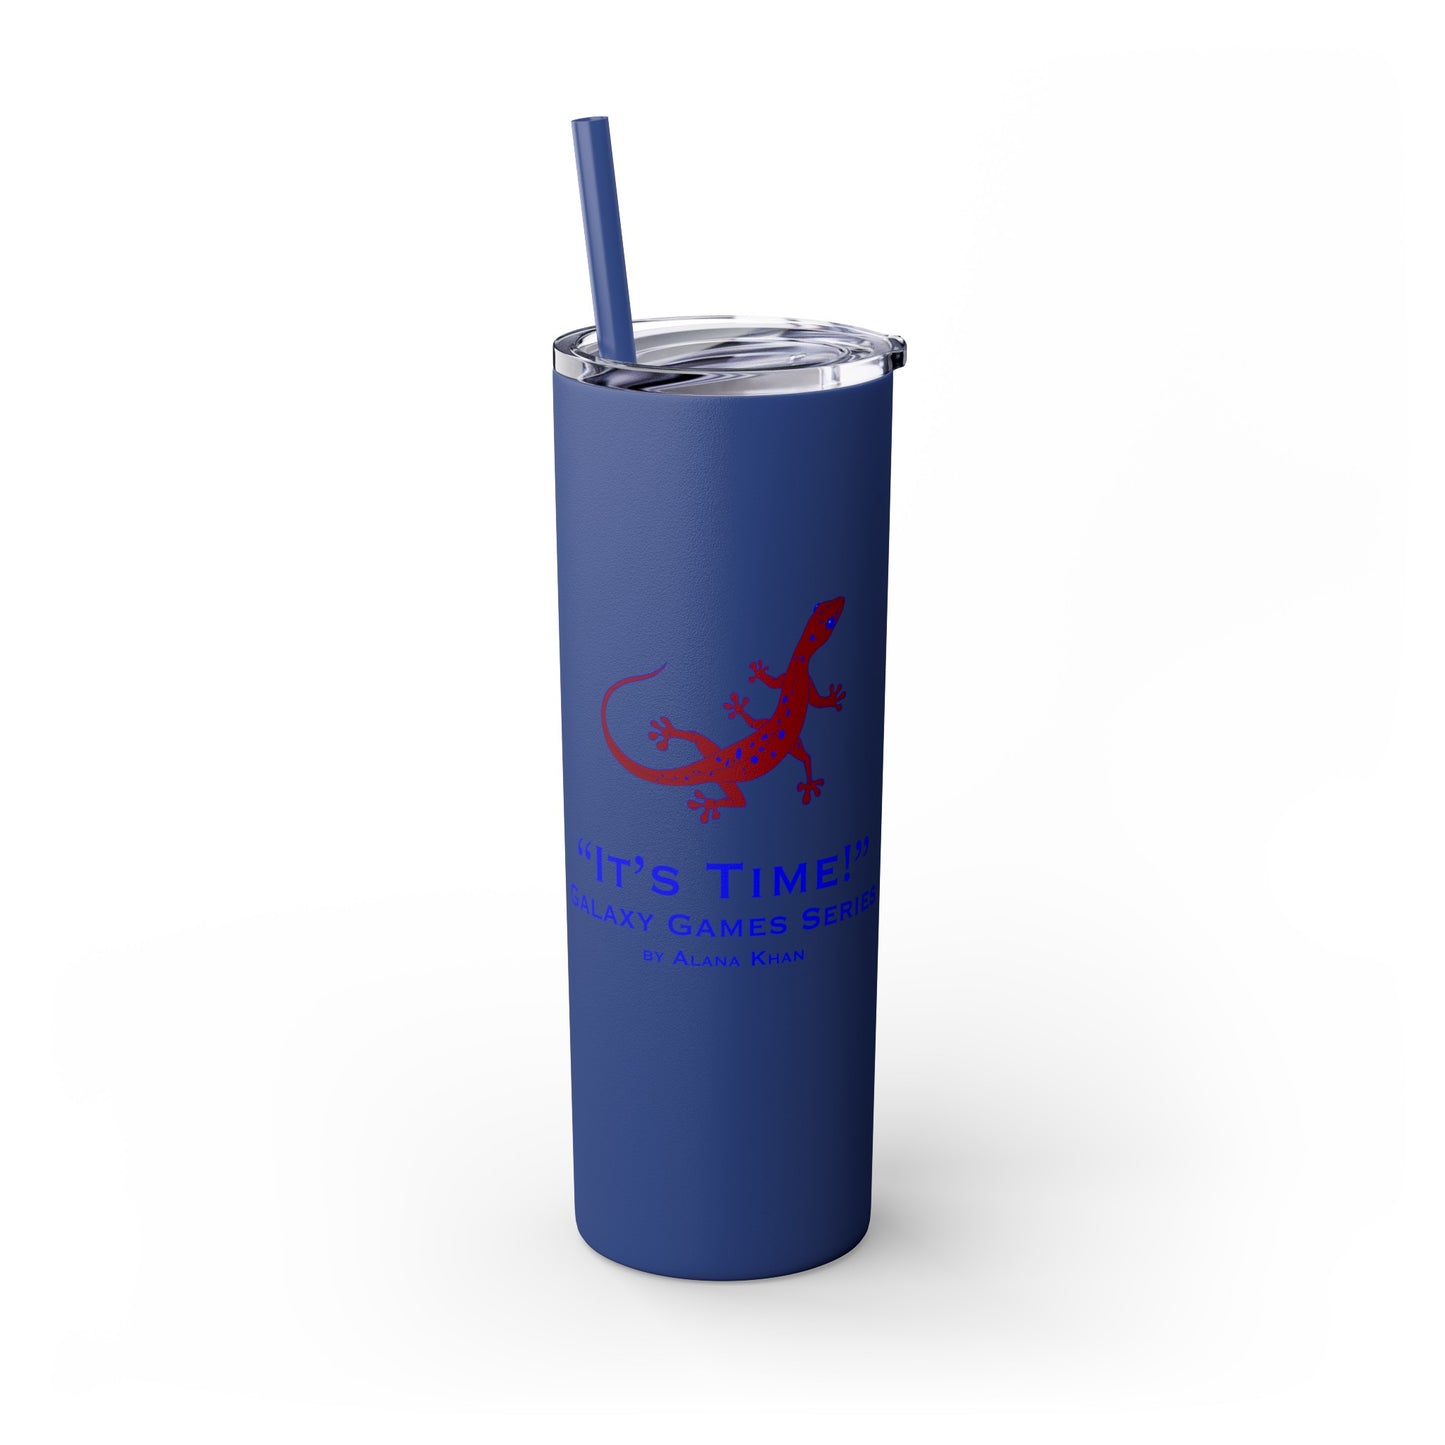 It's Time Galaxy Games Series Skinny Tumbler with Straw, 20oz